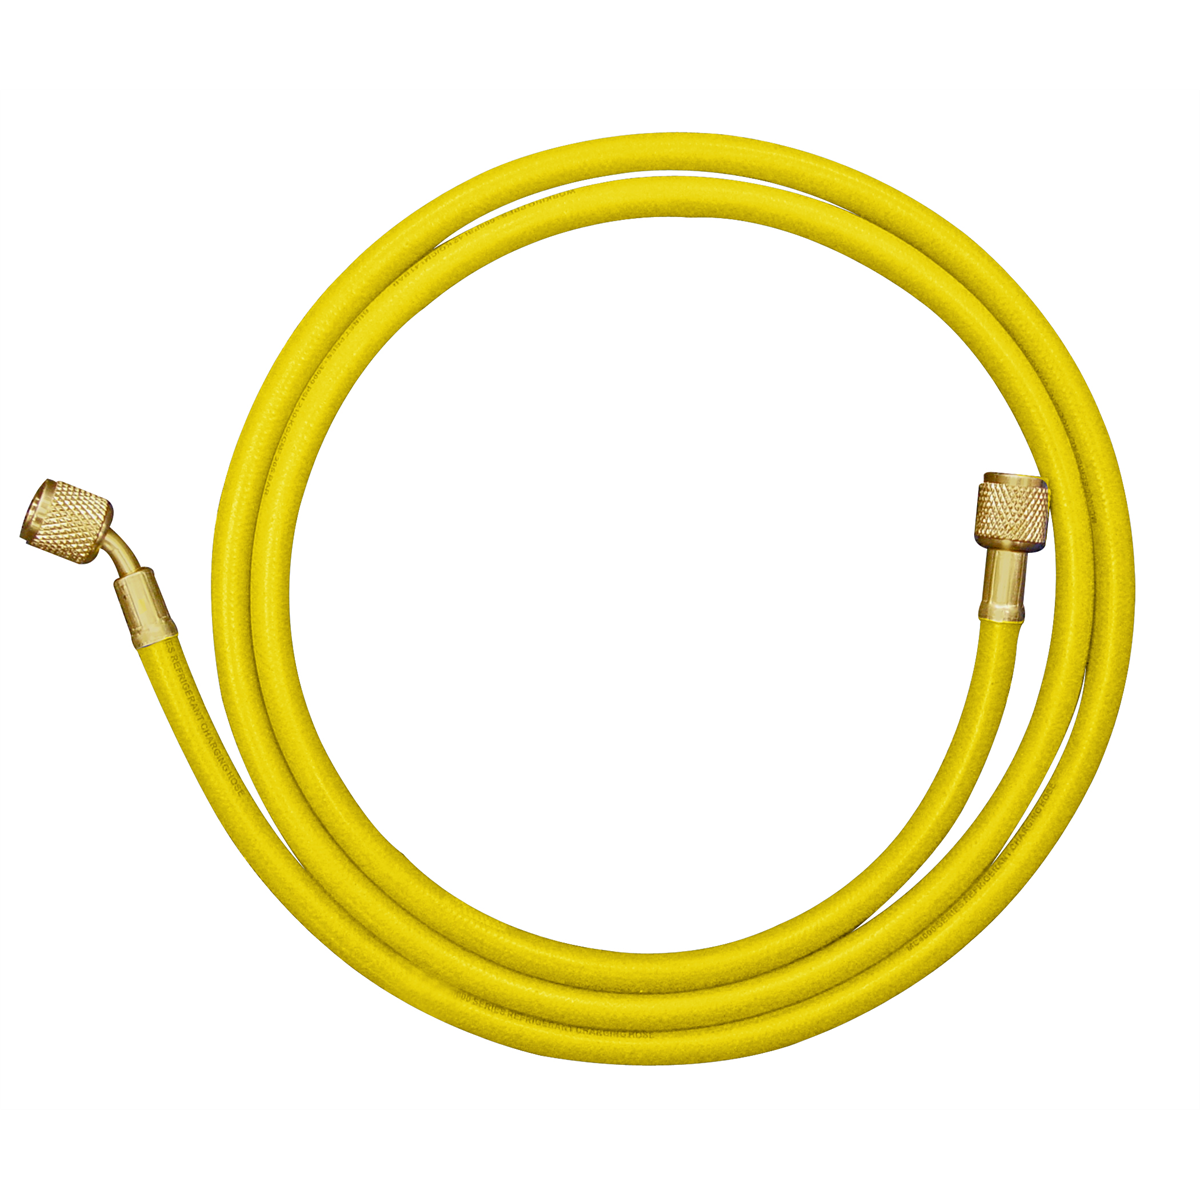 60 YELLOW HOSE W/STANDARD FIT